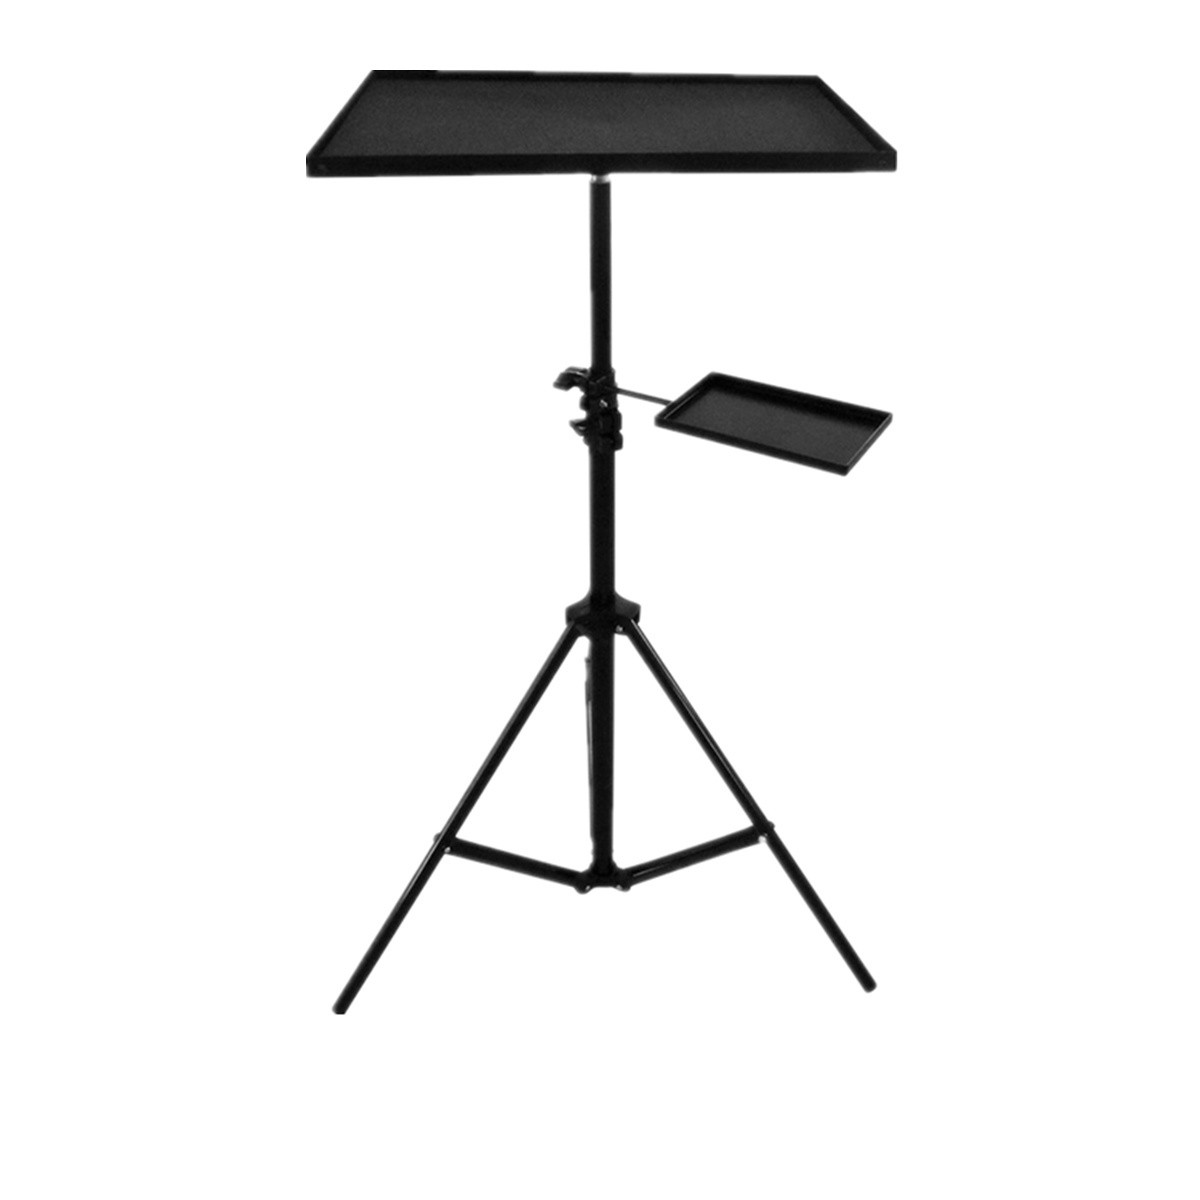 7-inch-to-15-inch-Metal-Laptop-PC-Projector-Tray-Holder-for-14-inch-38-inch-Screw-Tripod-Stand-1125040